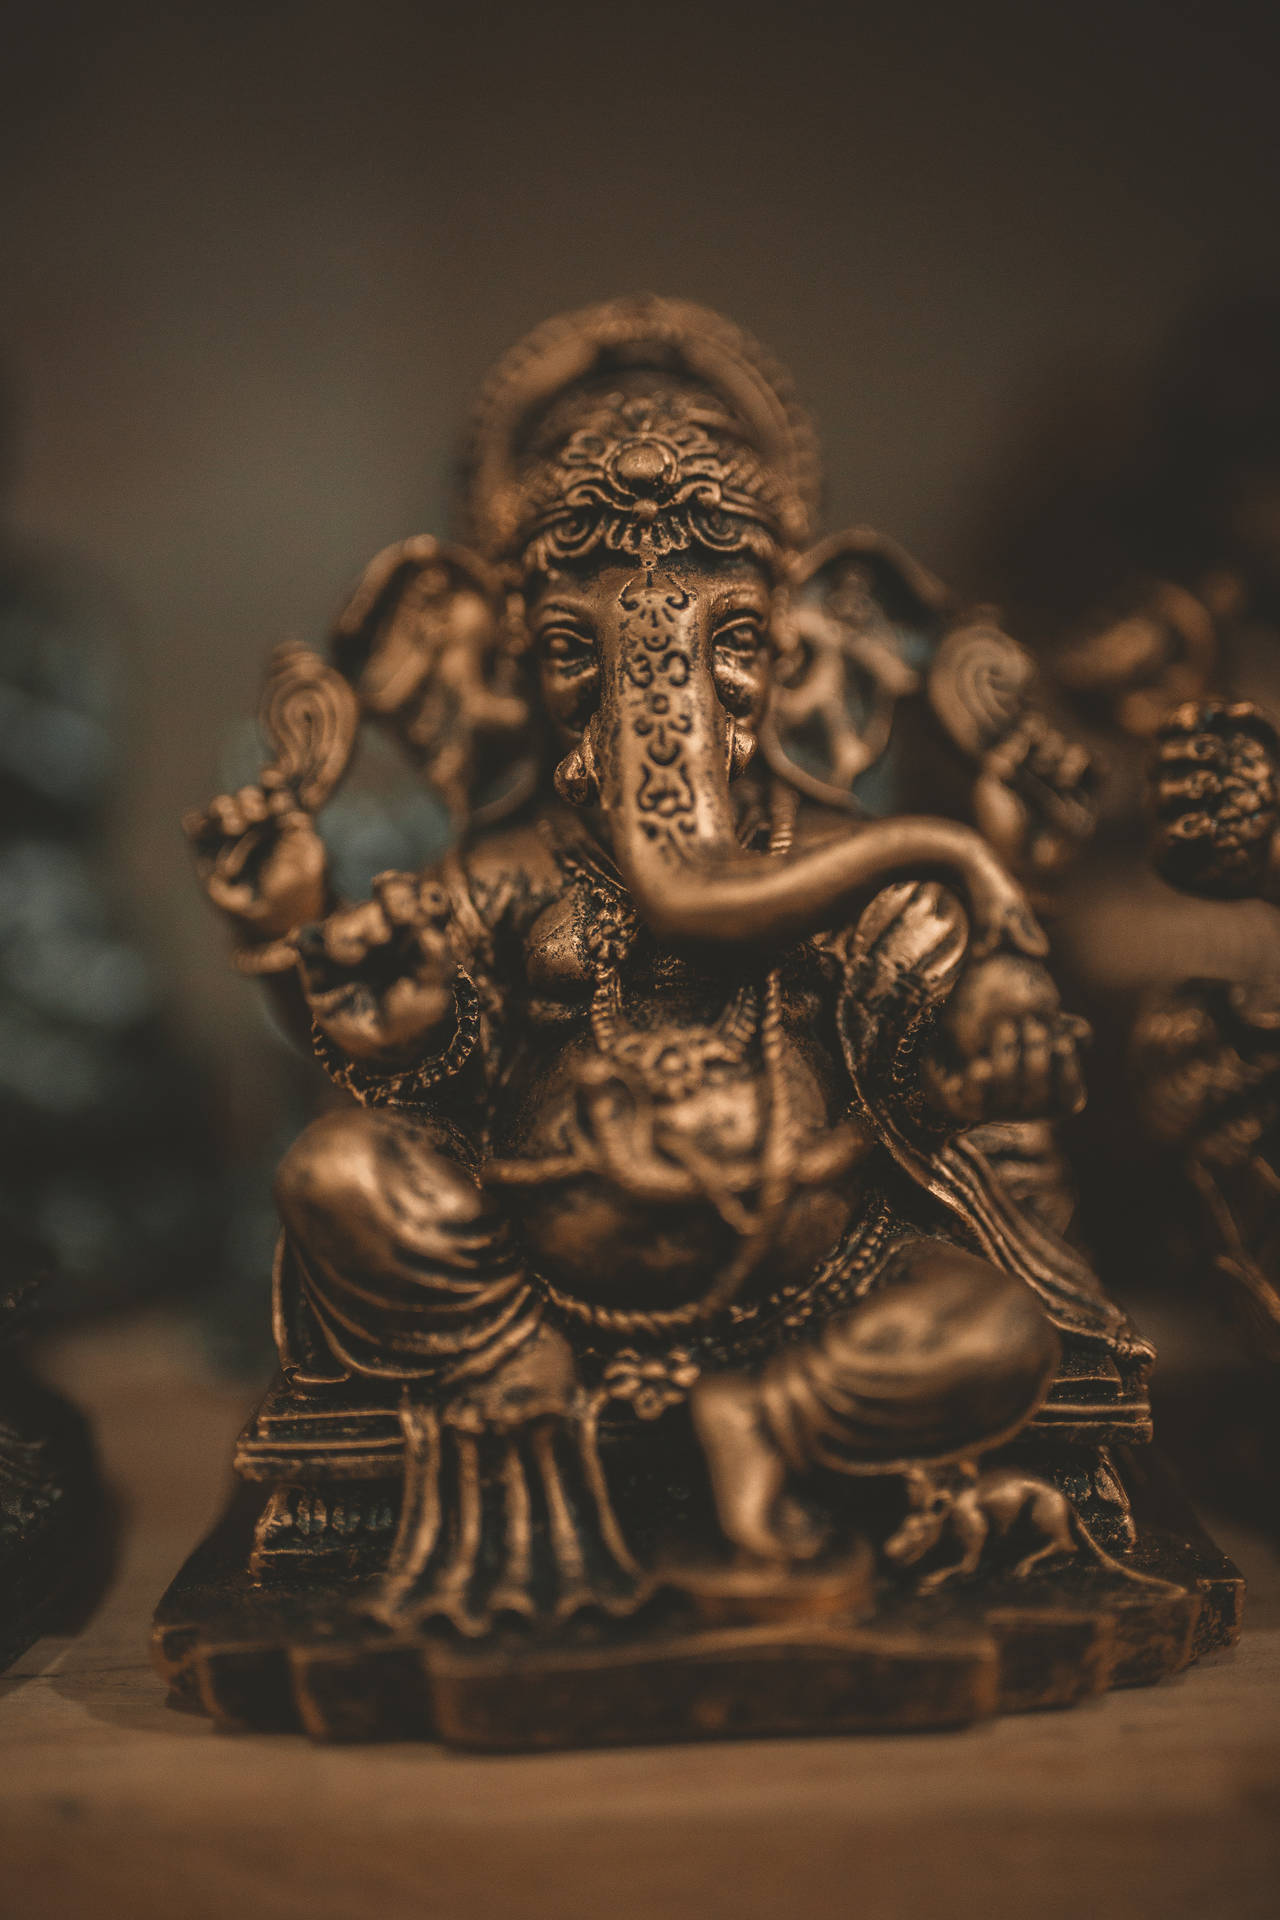 Litenbronsstaty Av Ganesh 4k (assuming This Is The Name Of A Wallpaper Featuring A Small Bronze Statue Of The Hindu Deity Ganesh) Wallpaper